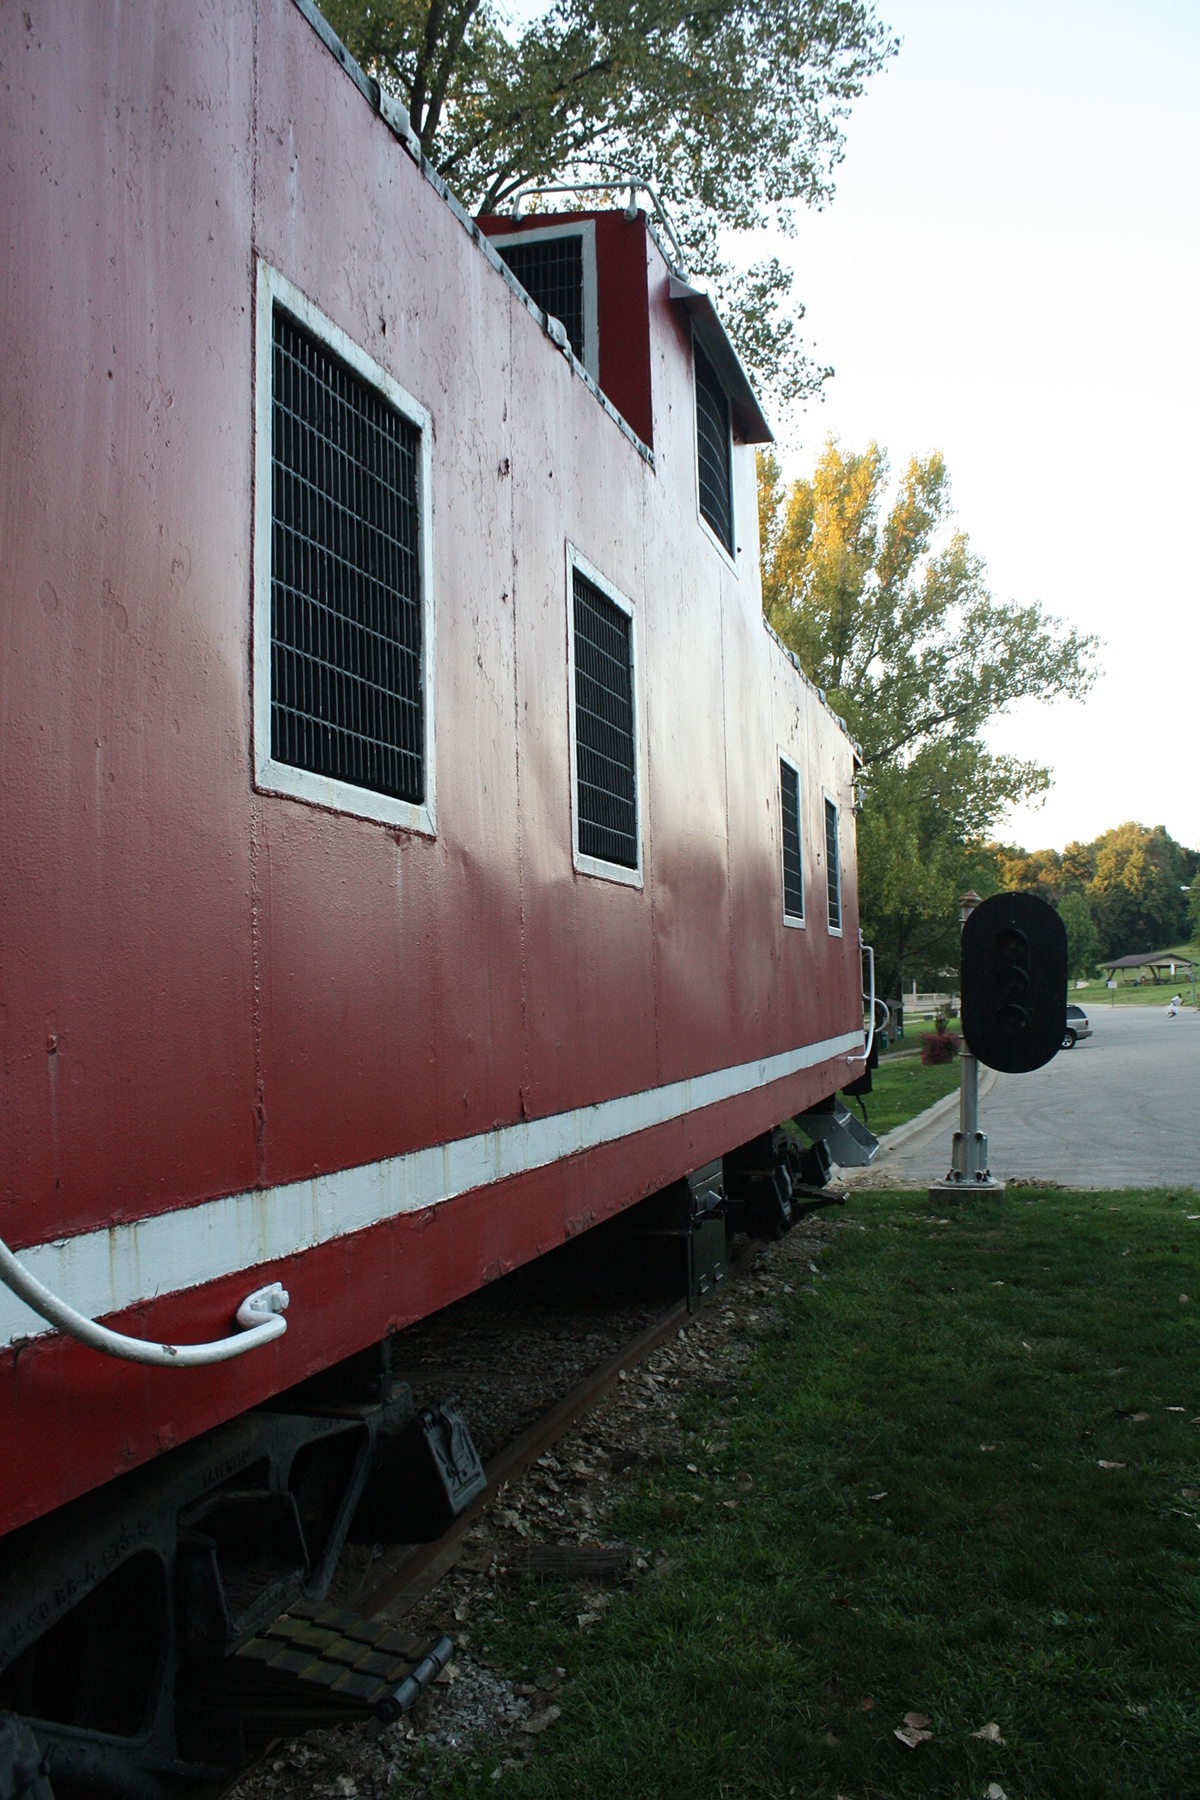 trains caboose red phopto Park